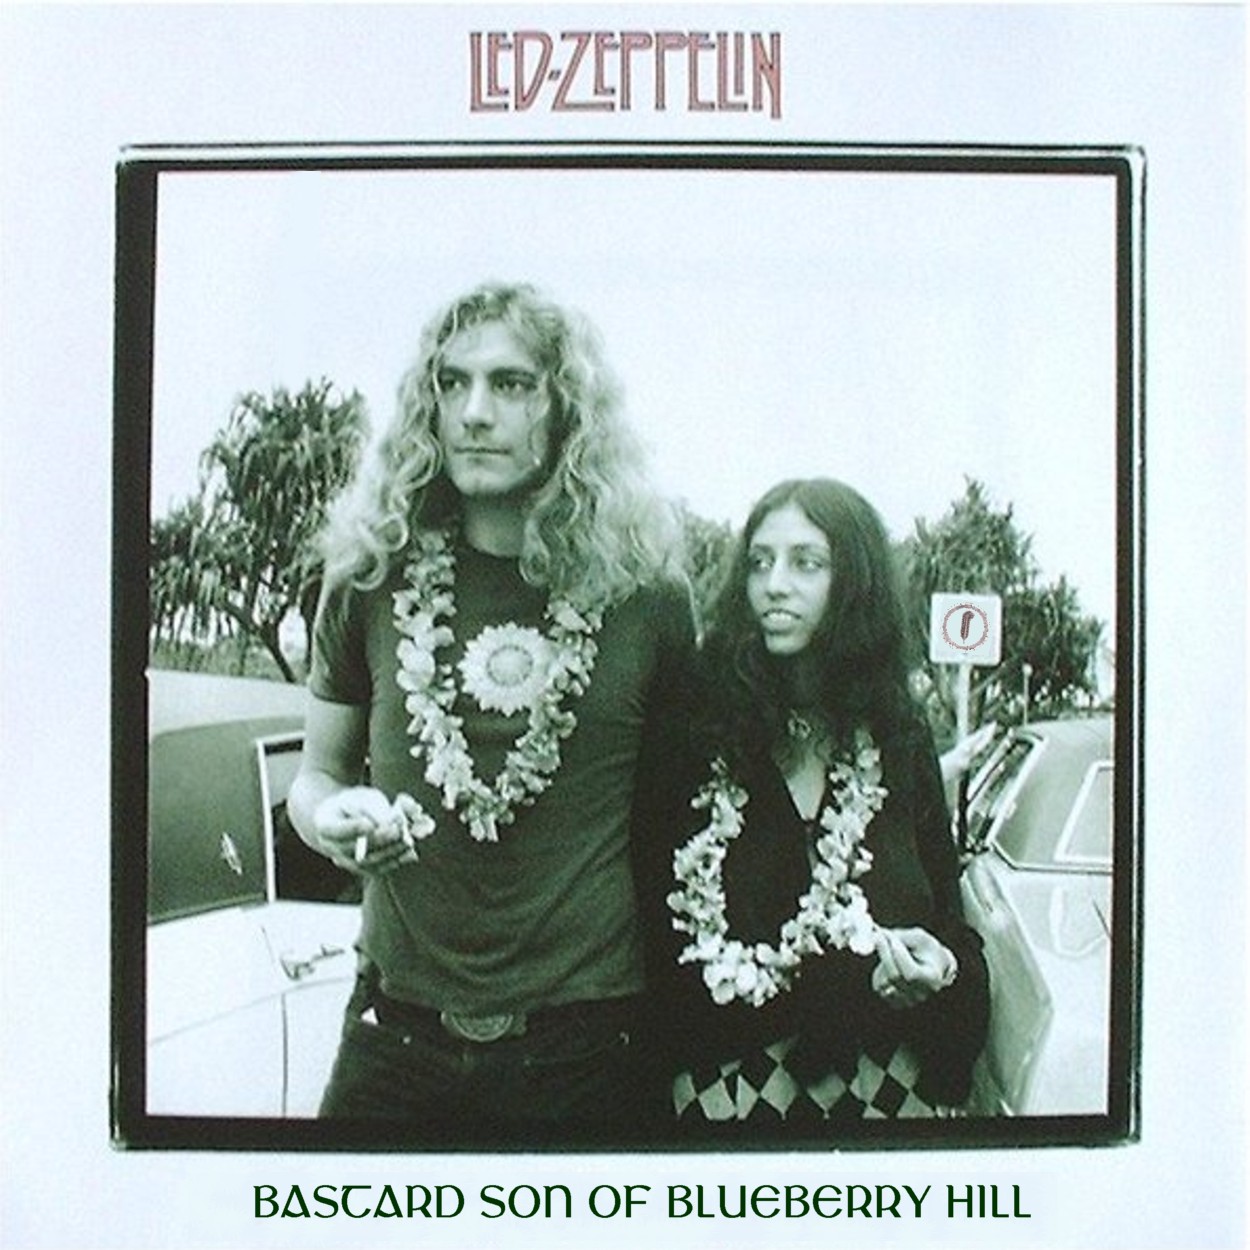 1970-09-06-bastard_son_of_blueberry_hill-front